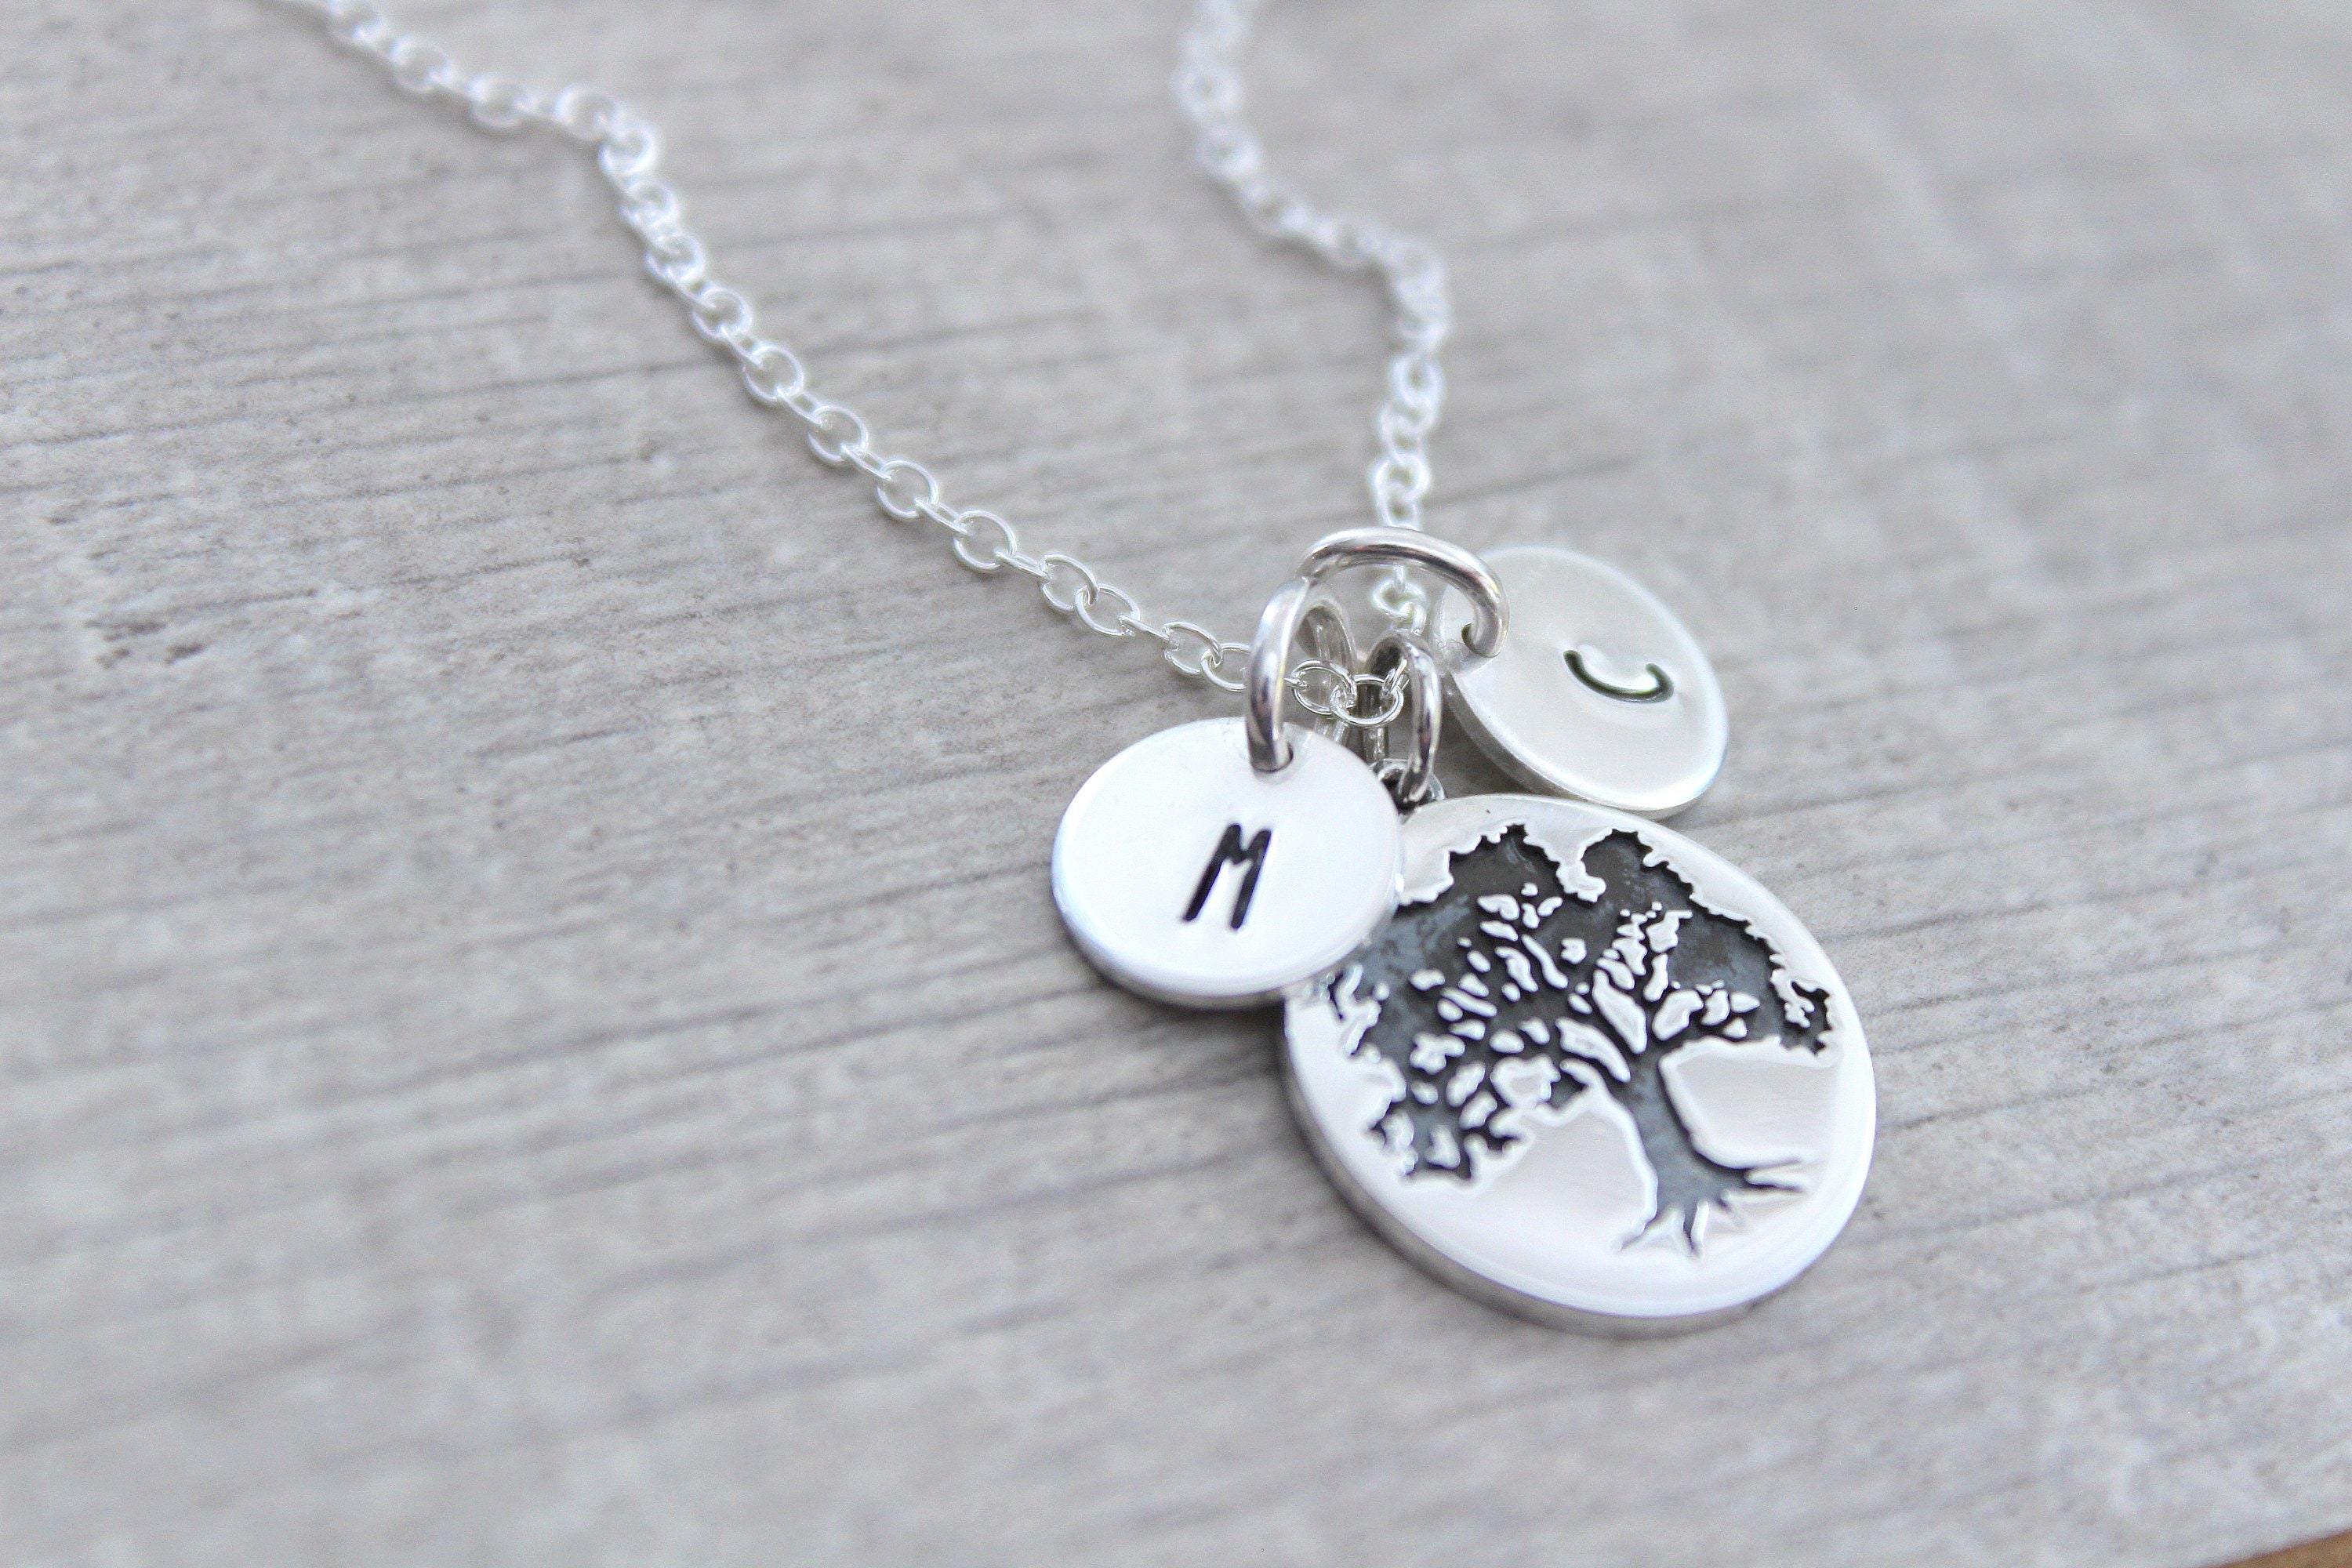 Oak Tree Necklace in Sterling Silver - Hand Pierced Design w/ Leaves &  Initials by EWDJewelry - Nature Inspired Gift